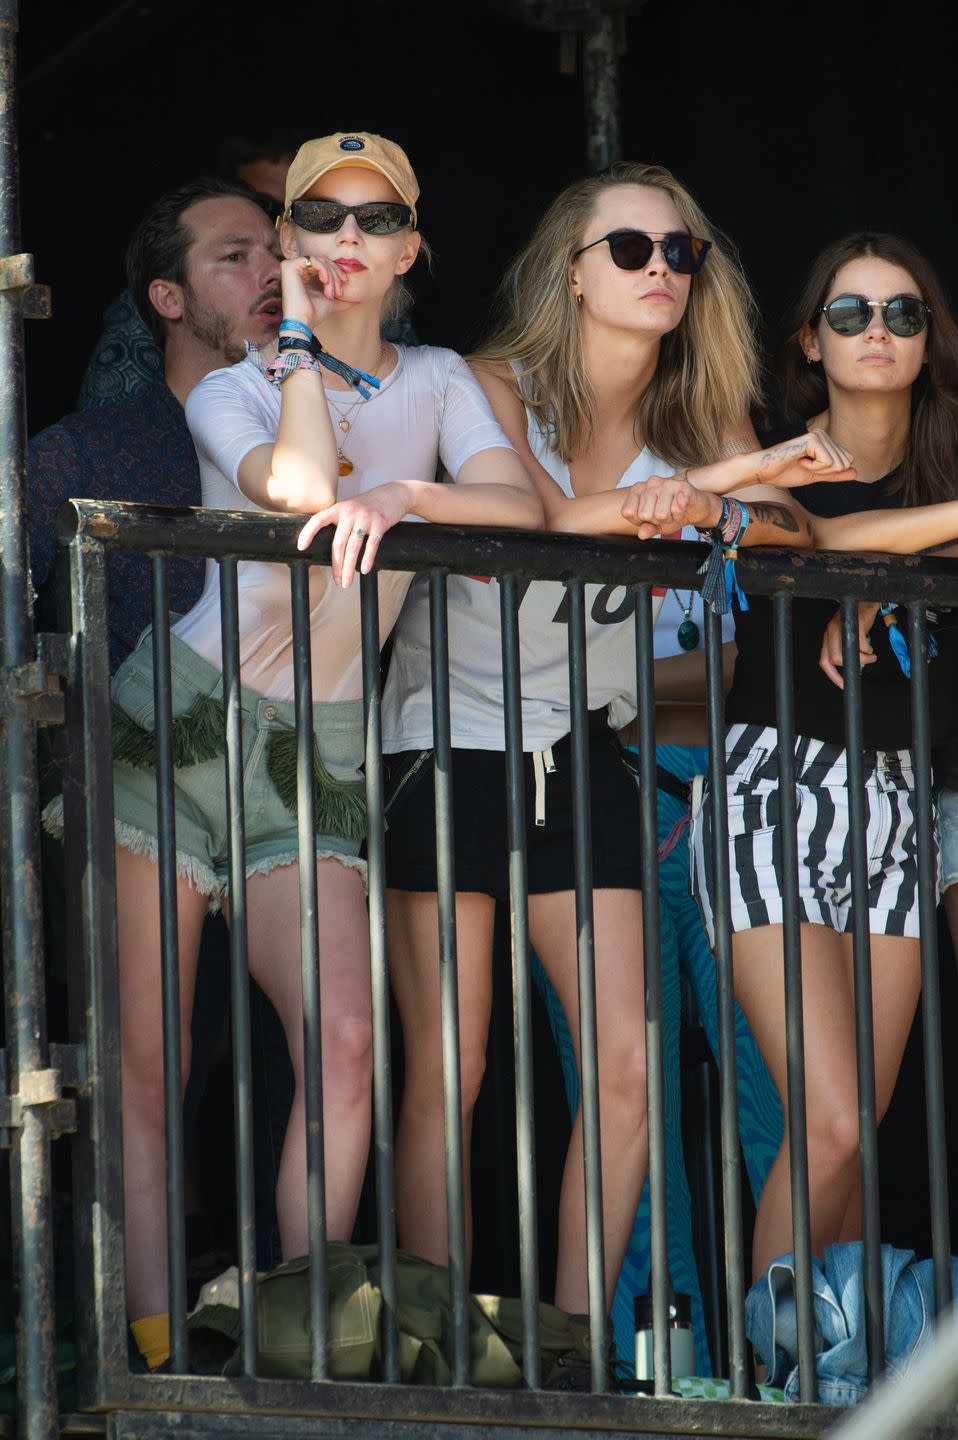 Glastonbury, England June 29 Anya Taylor Joy and Cara Delevingne watch The Last Garden Party perform on day four of the 2024 Glastonbury Festival at Worthy Farm in Pilton. June 29, 2024 in Glastonbury, England Founded in 1970 by Michael Eavis, the Glastonbury Festival features around 3,000 performances on over 80 stages. Known for its lively atmosphere and iconic Pyramid Stage, the festival offers a diverse program of music and art that embodies a spirit of community, creativity and environmental awareness. Photo by Joseph Okpakowireimage